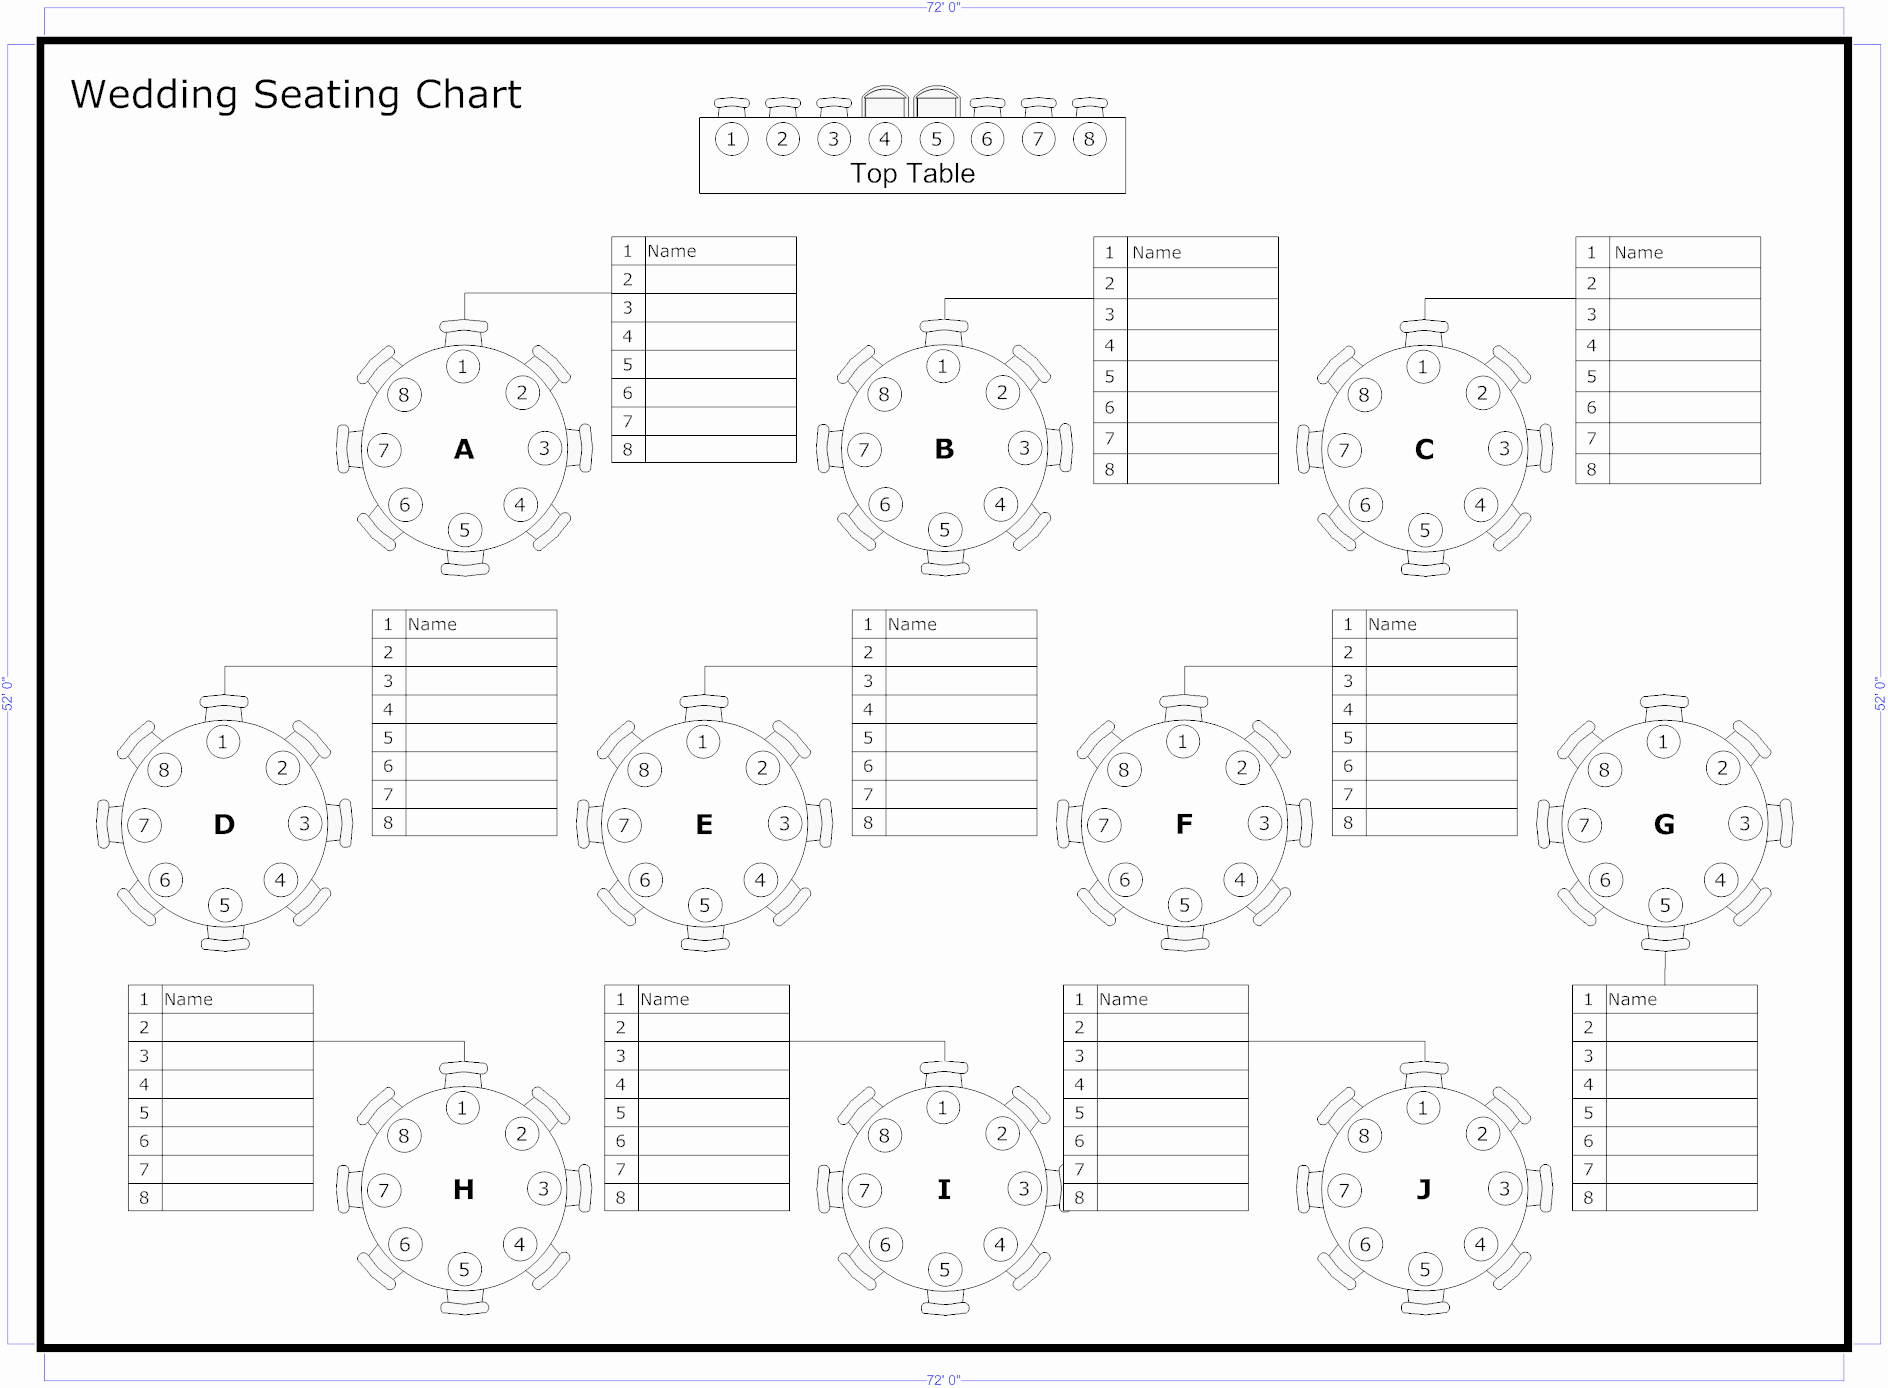 Church Seating Chart Template Best Of Tips to Seat Your Wedding Guests